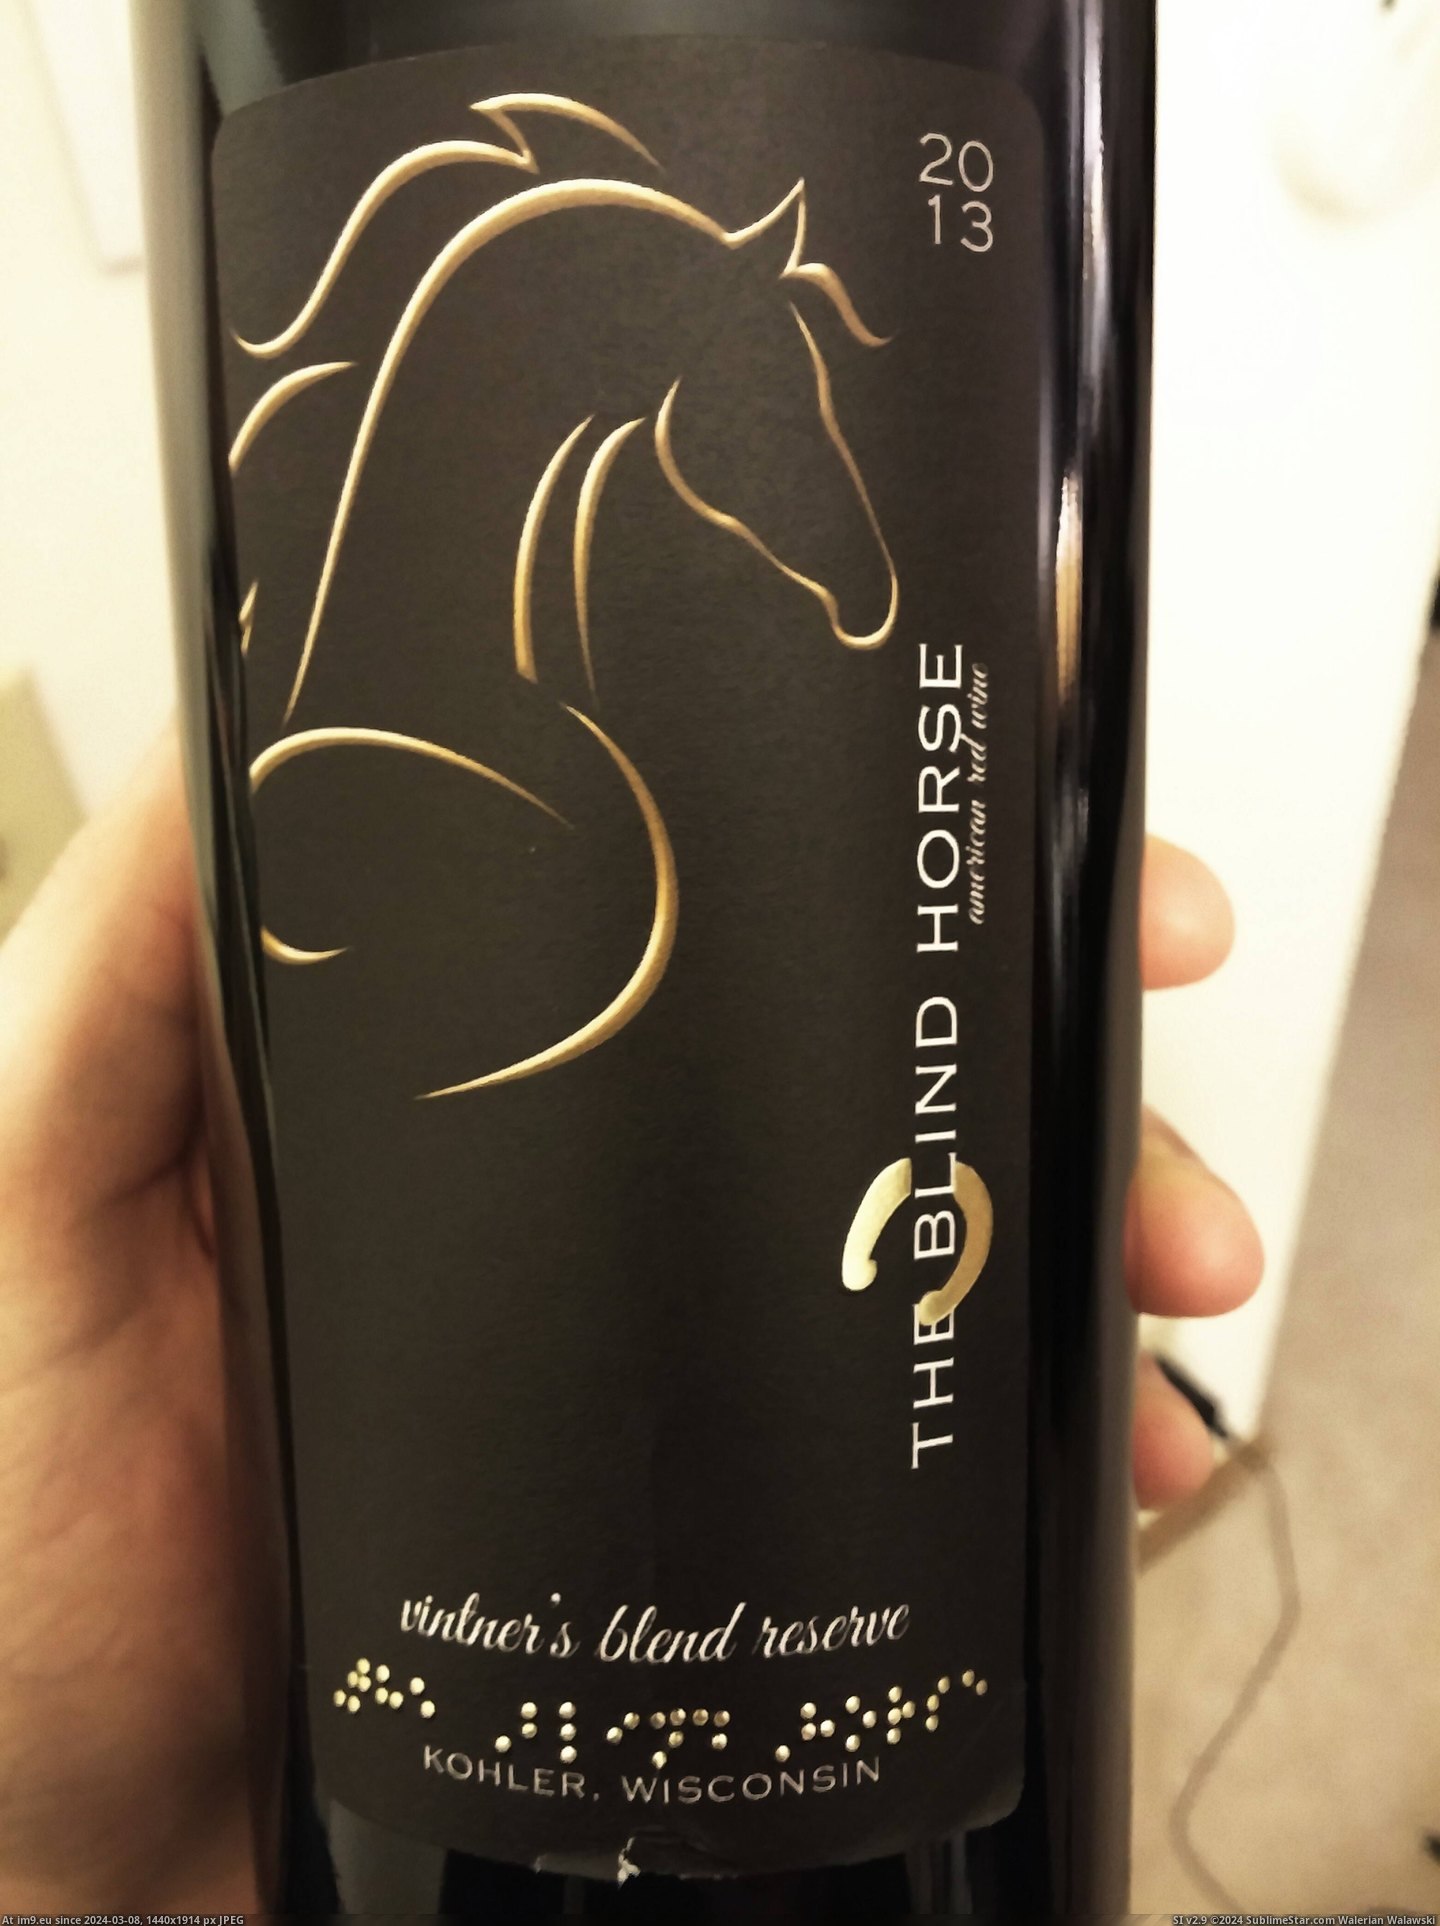 #Honor #Bottle #Horse #Actual #Label #Dots #Braille #Wine #Raised #Blind [Mildlyinteresting] This wine bottle label has actual raised Braille dots to honor the name of the winery, 'The Blind Horse.' Pic. (Bild von album My r/MILDLYINTERESTING favs))